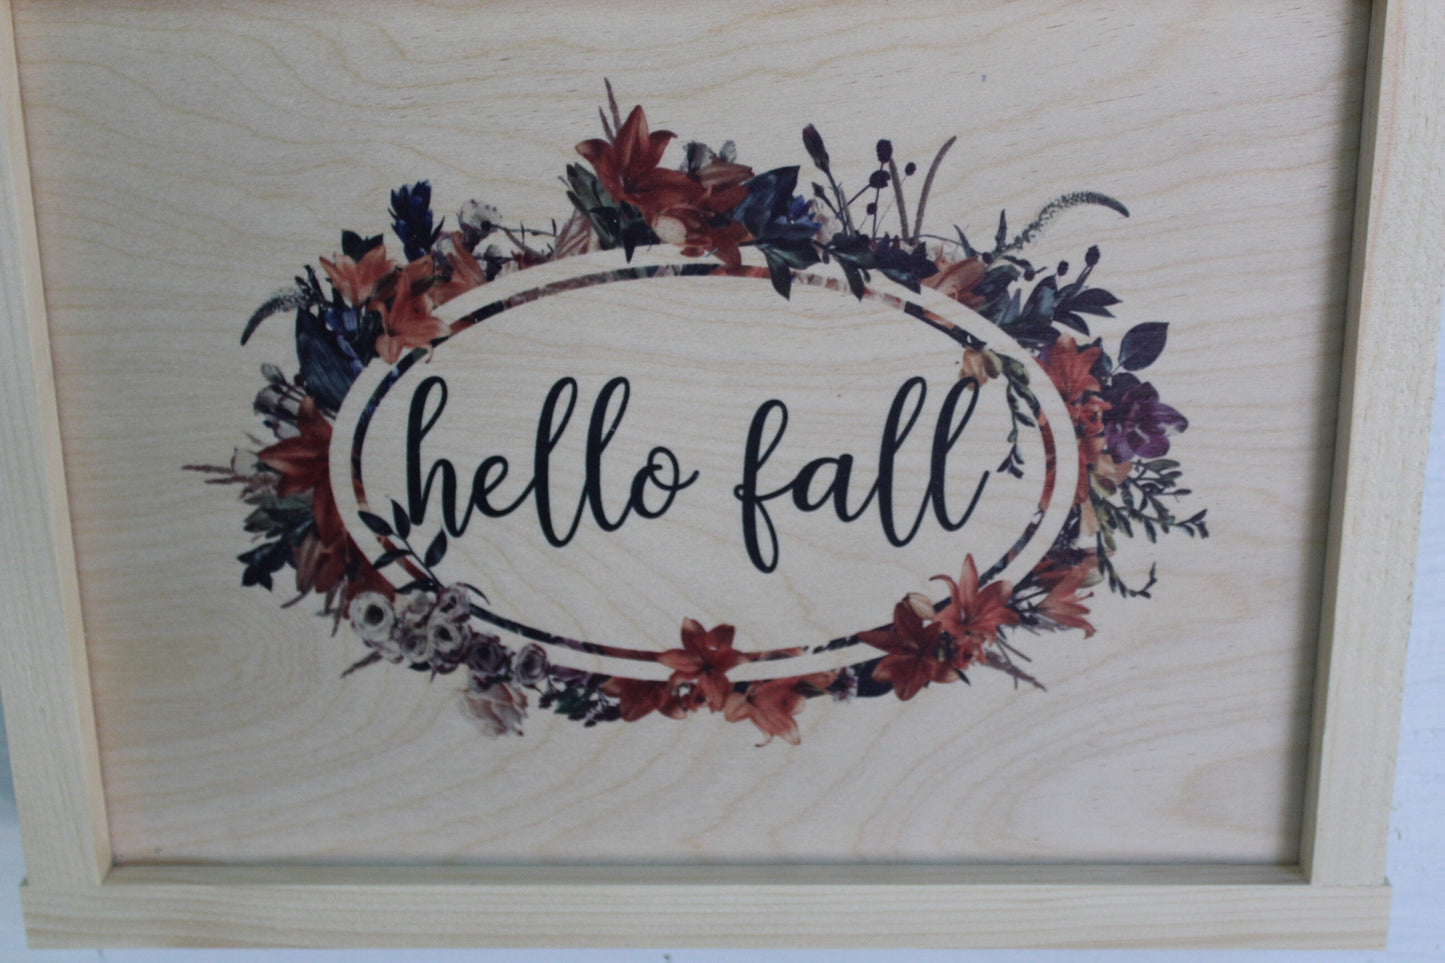 Hello Fall Colorful Wreath Wood Sign Rustic Wall Hanging Leaves Blue Mauve Natural Wood Framed Print Text Country Decoration Gift Simple